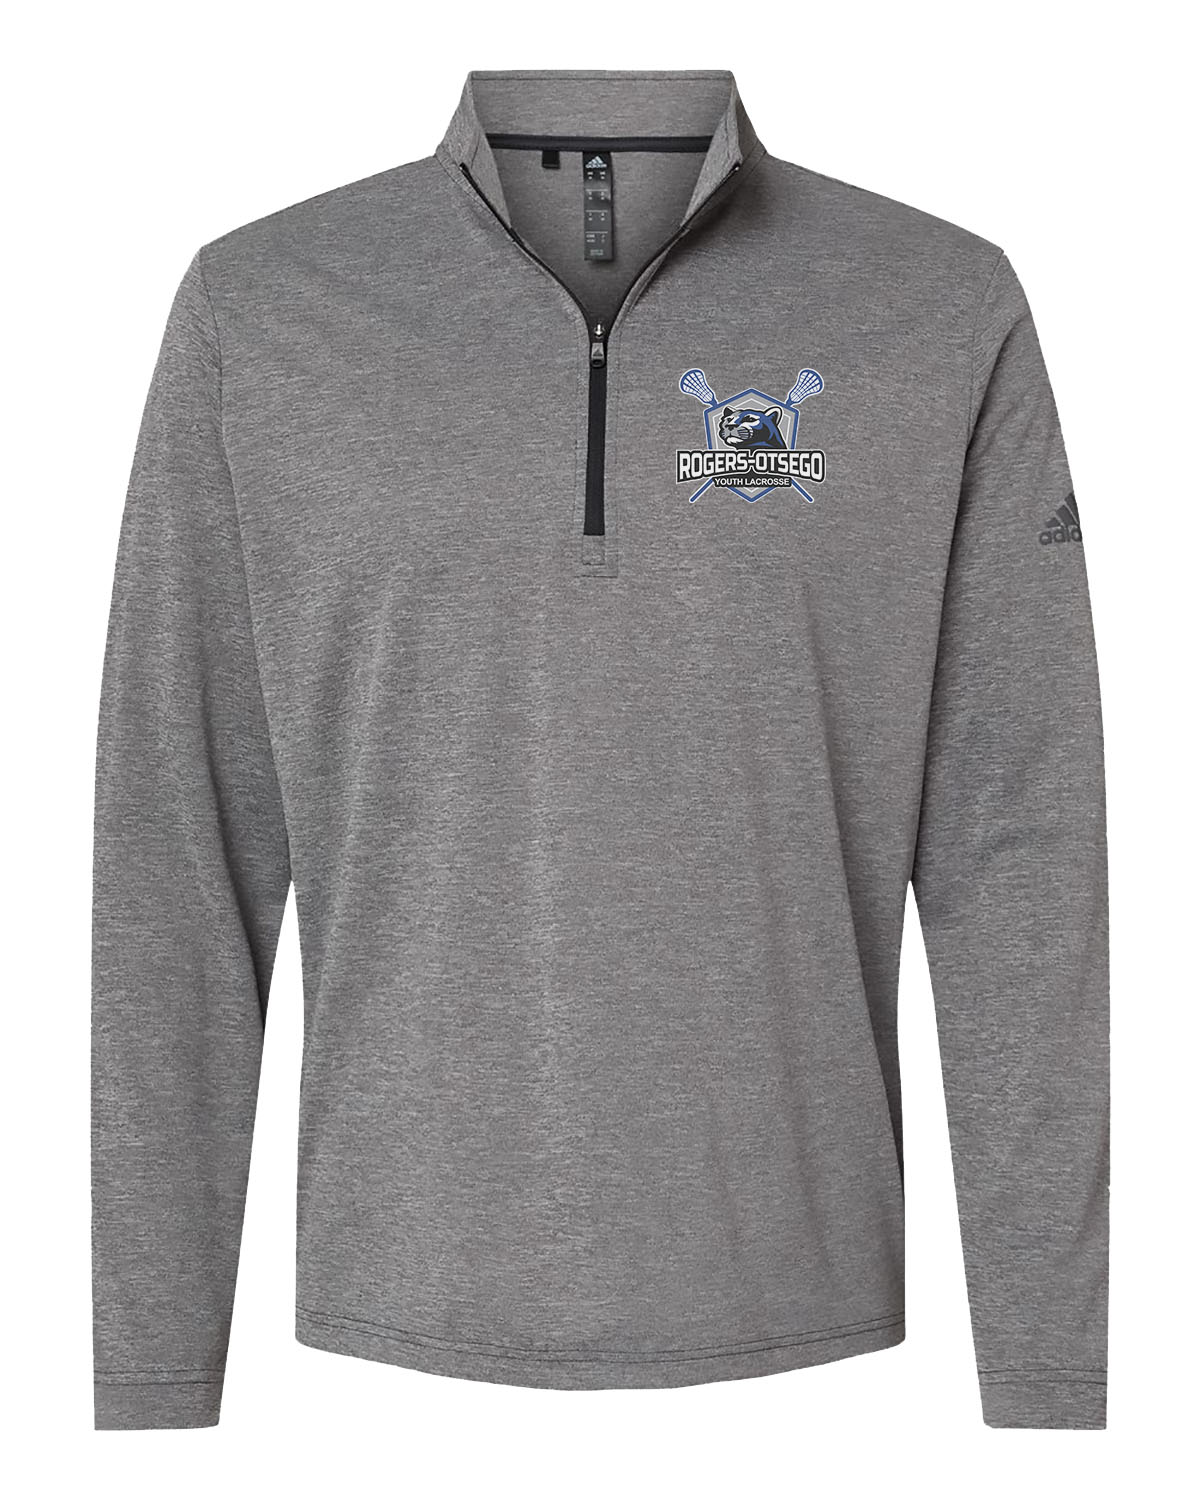 Rogers-Otsego Lacrosse // Men's Pullover - Adidas